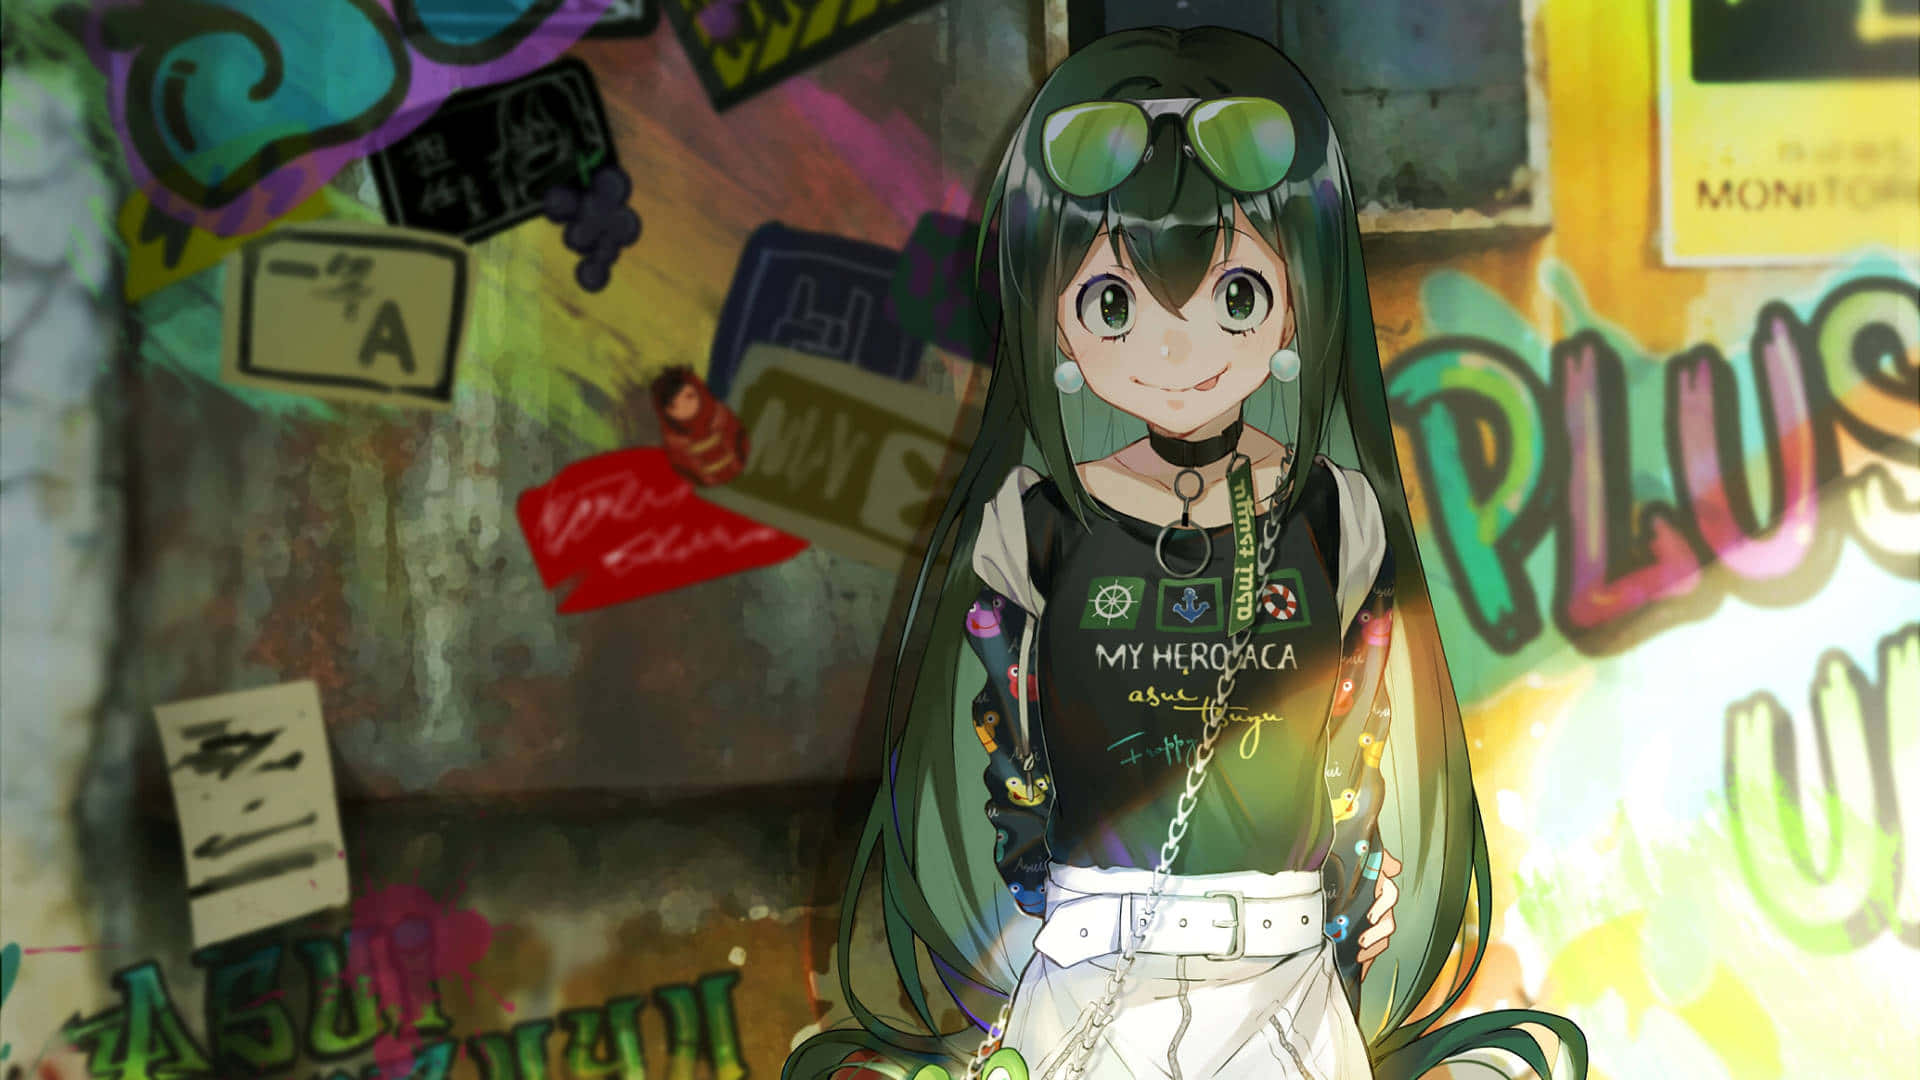 Get Ready to Hop Along with Froppy!